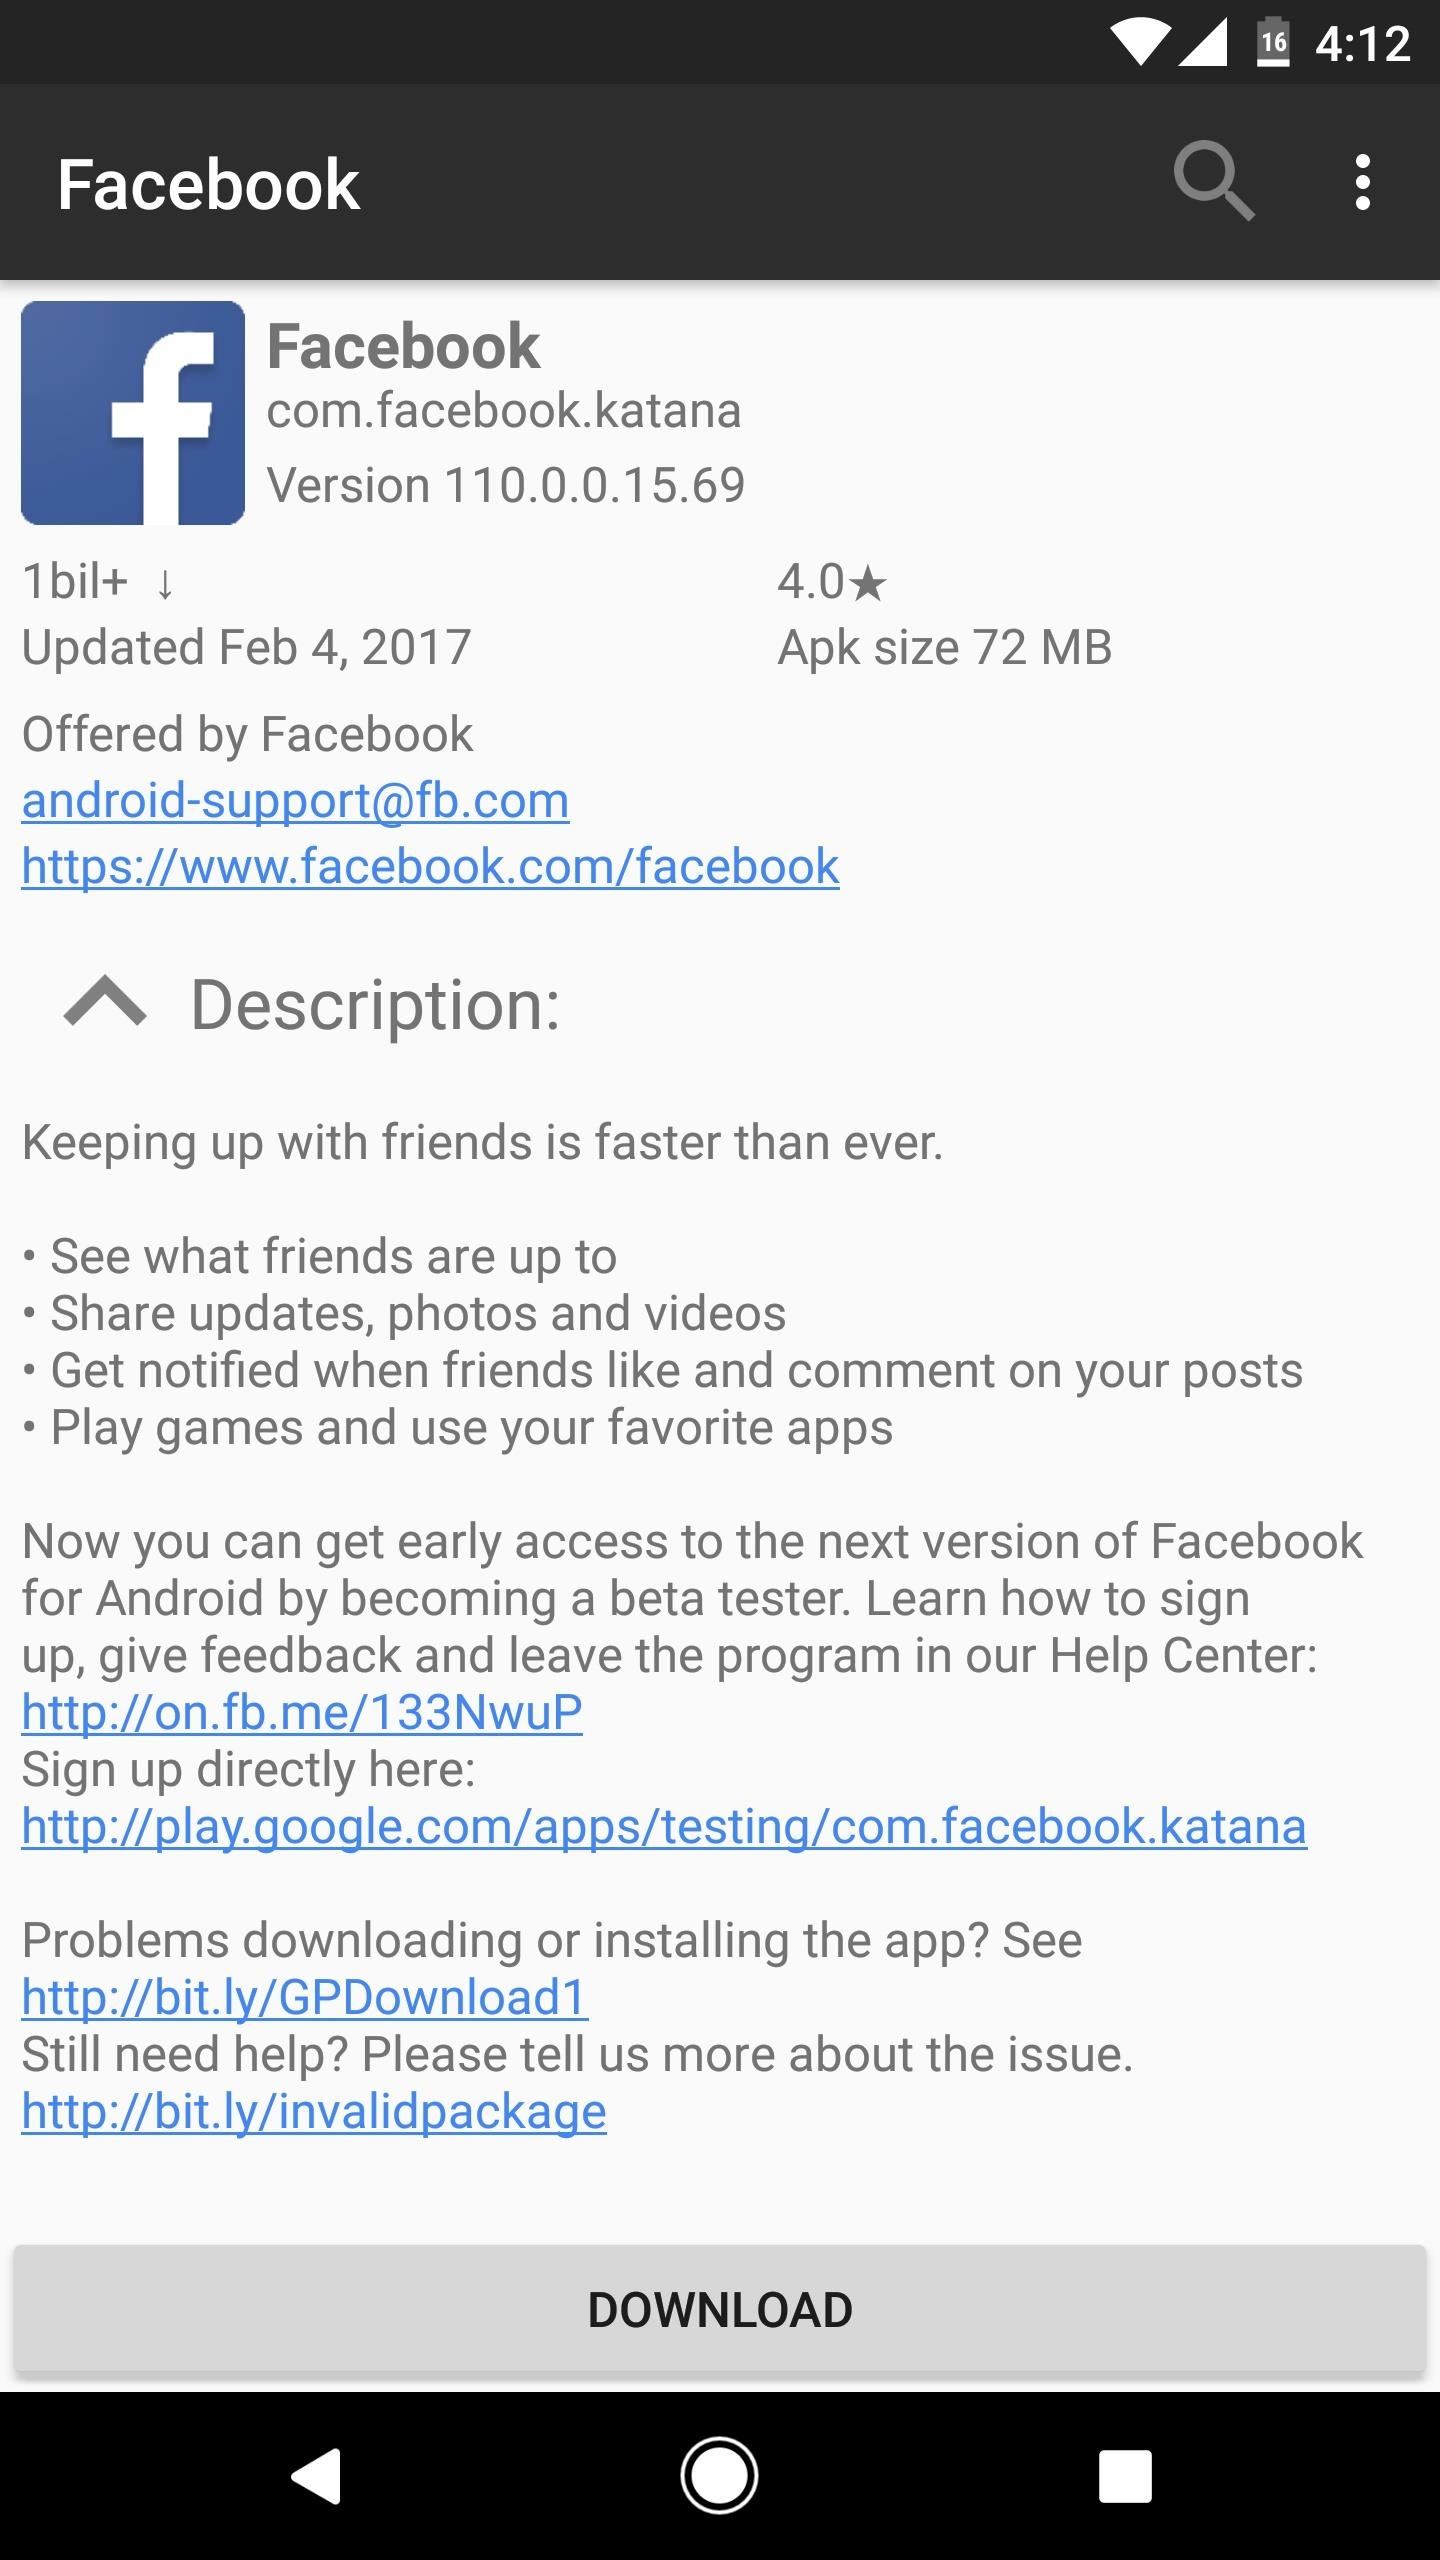 How to Install Apps from the Play Store Without Gapps or Google Services